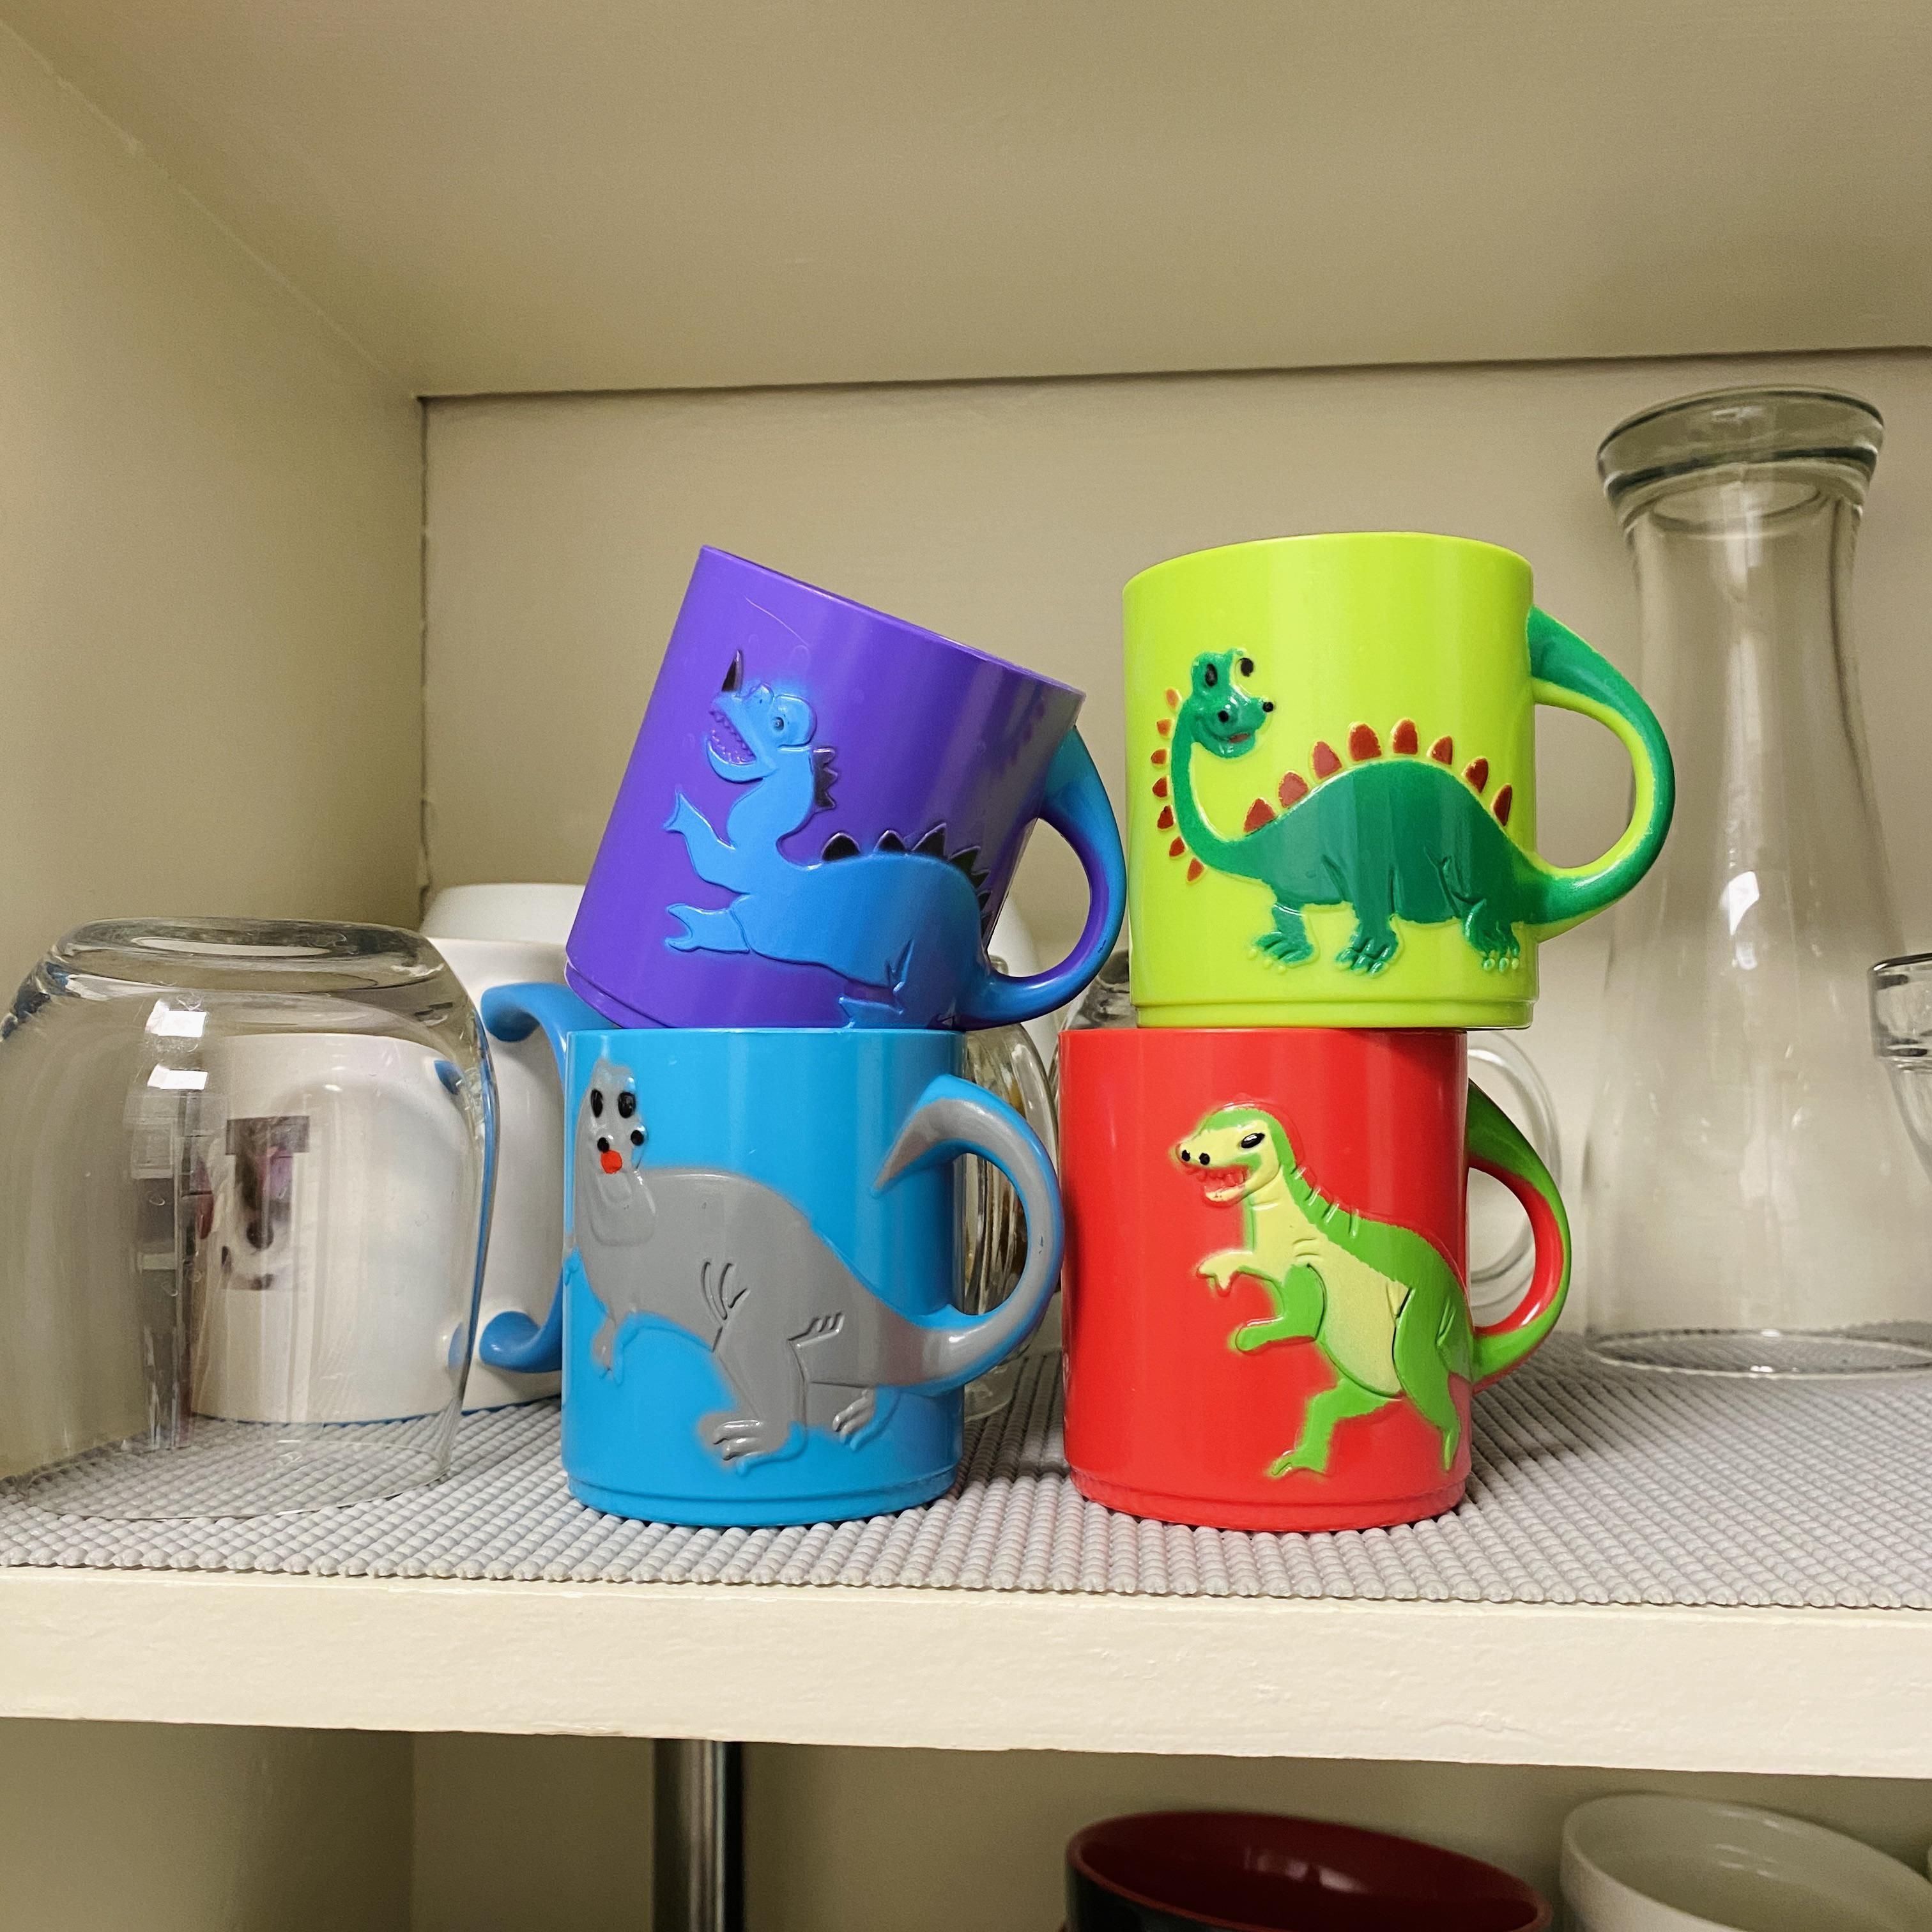 I asked my husband to buy some cheap plastic drinking cups so that we don’t always have to drink from glass cups and potentially break them while handling them. This is what he bought…